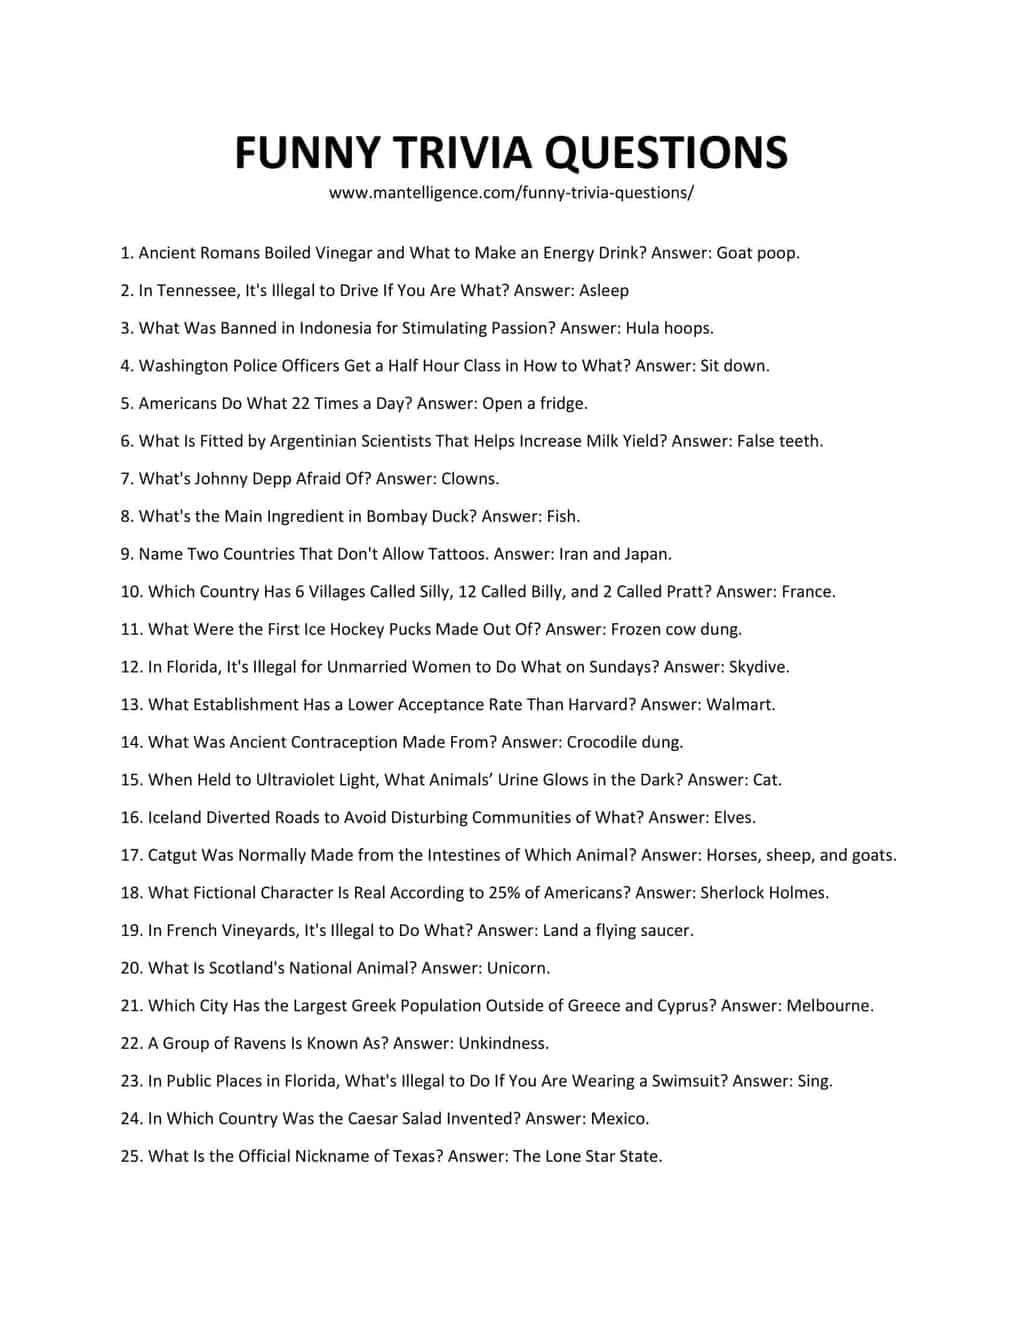 Fun Printable Trivia Questions And Answers